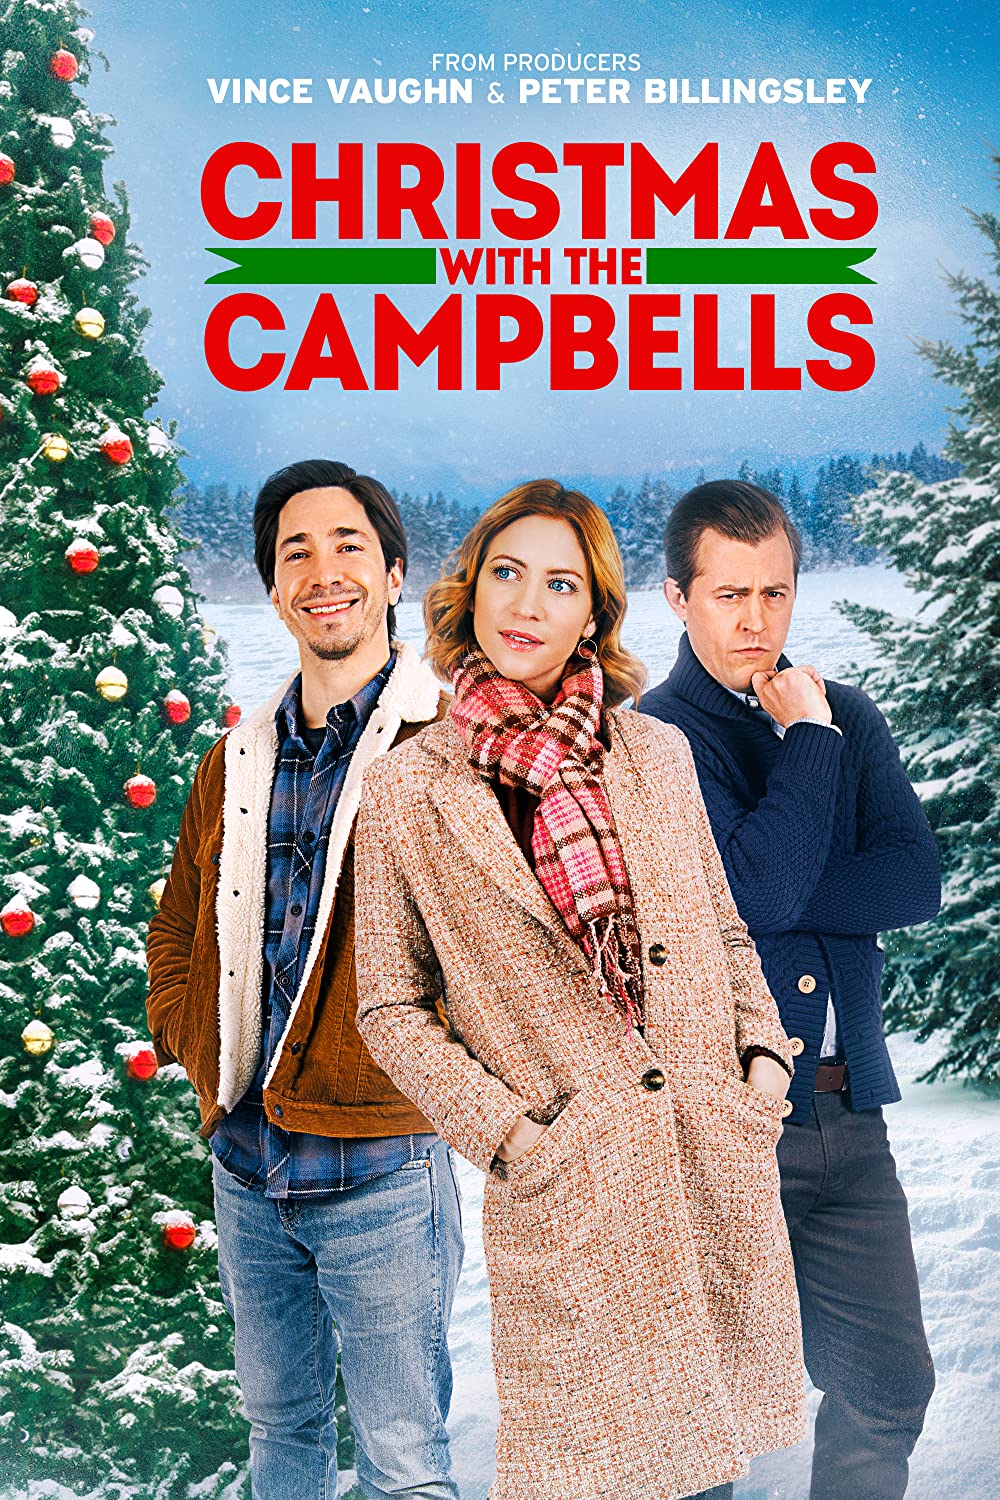 Christmas with the Campbells 2022 English 480p HDRip ESub 340MB Download